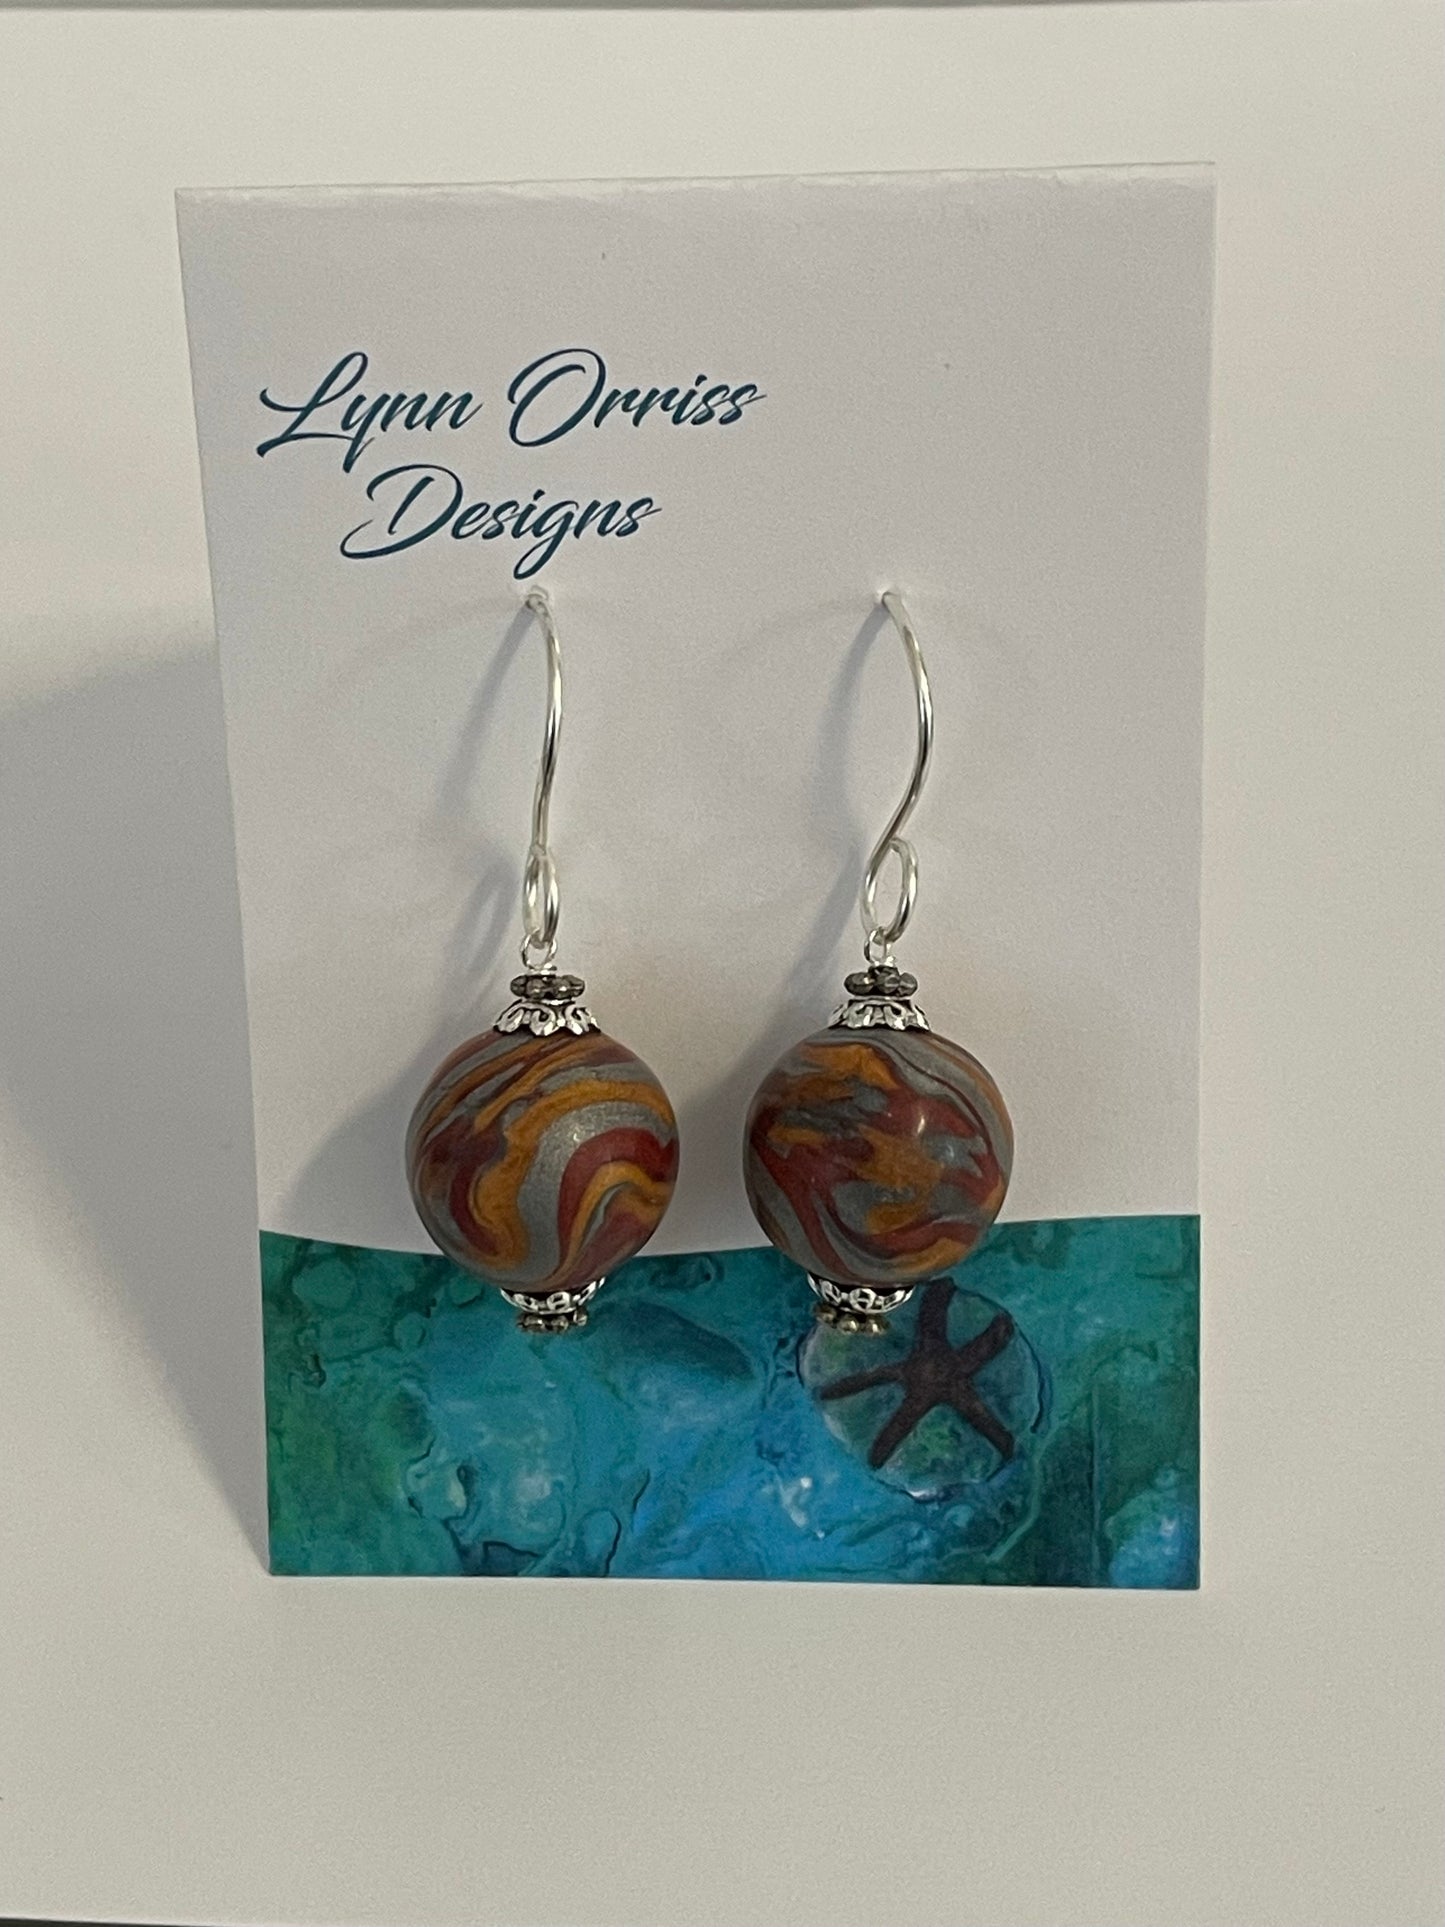 Lynn Orriss - Earrings -Gold trio - Large - McMillan Arts Centre - McMillan Arts Centre Gallery, Gift Shop and Box Office - Vancouver Island Art Gallery